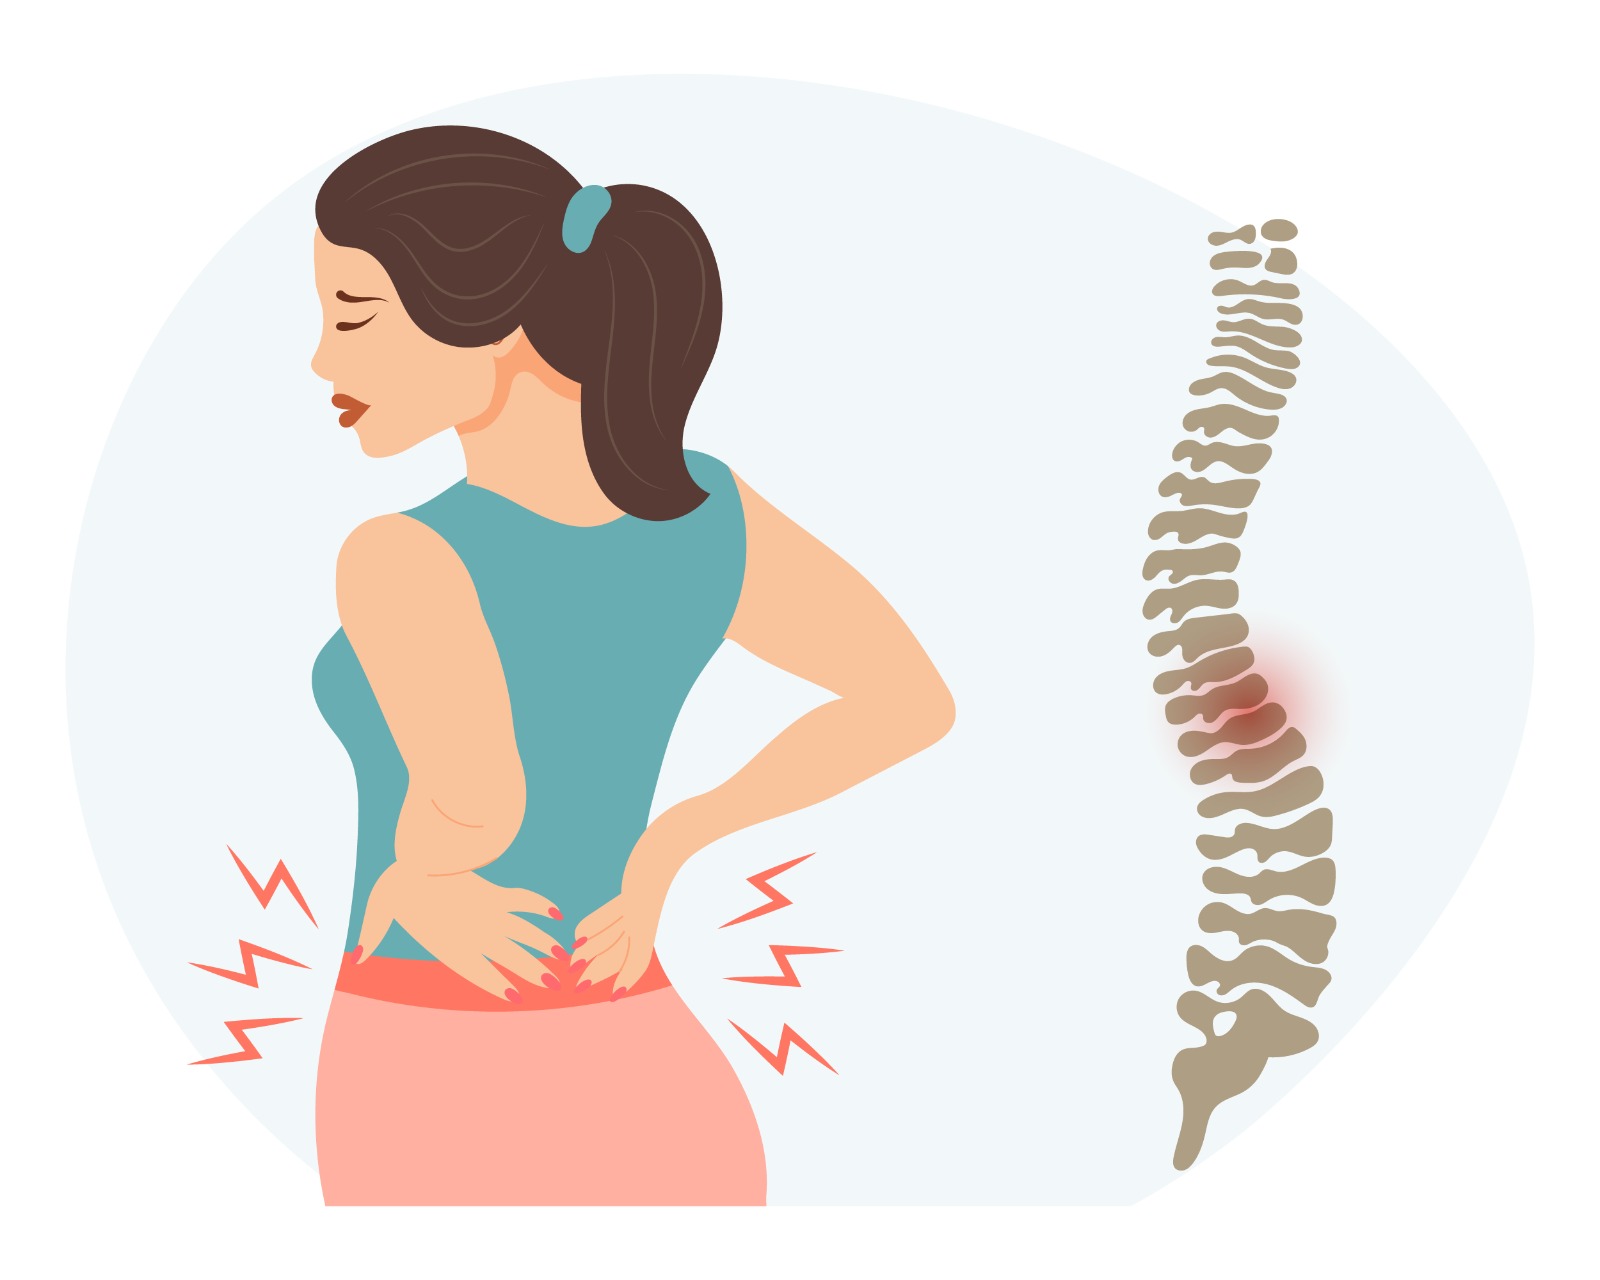 What are the symptoms of spondylitis?